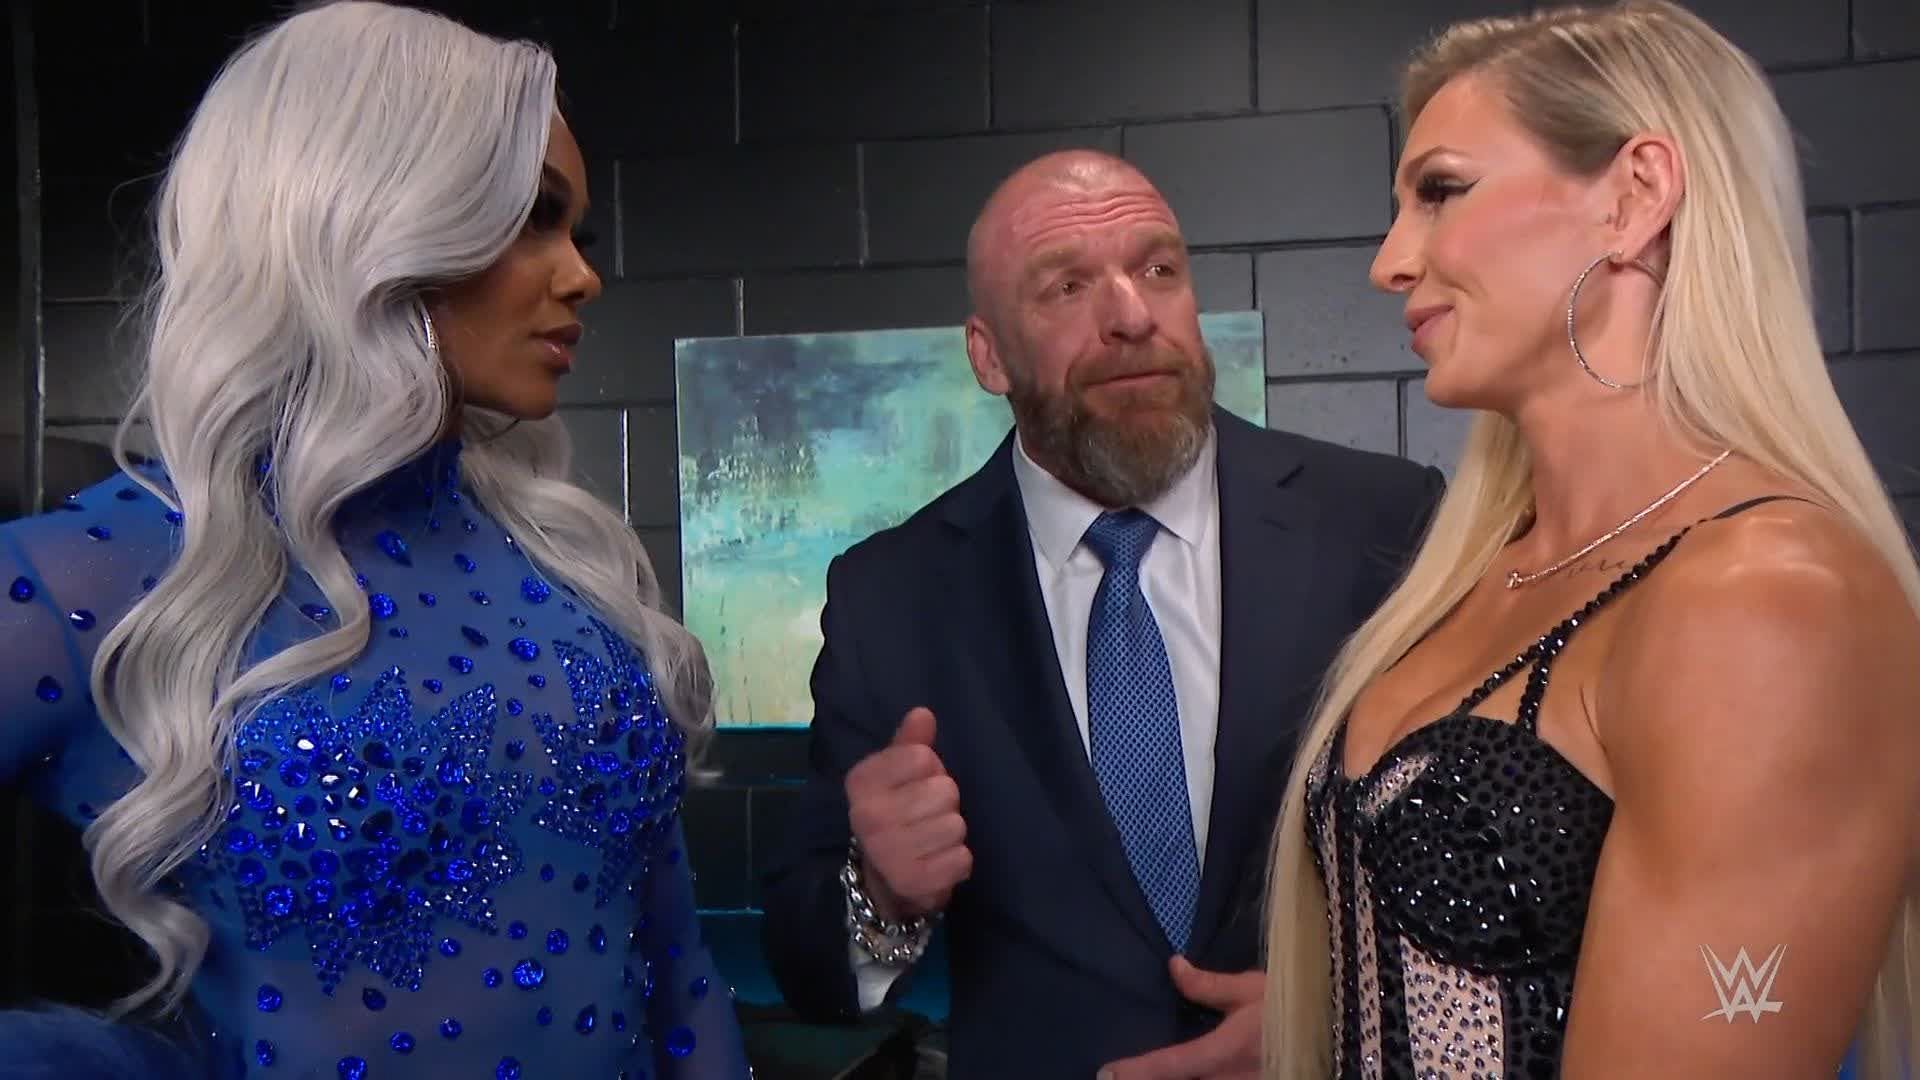 Jade Cargill and Charlotte Flair went face-to-face on WWE SmackDown.